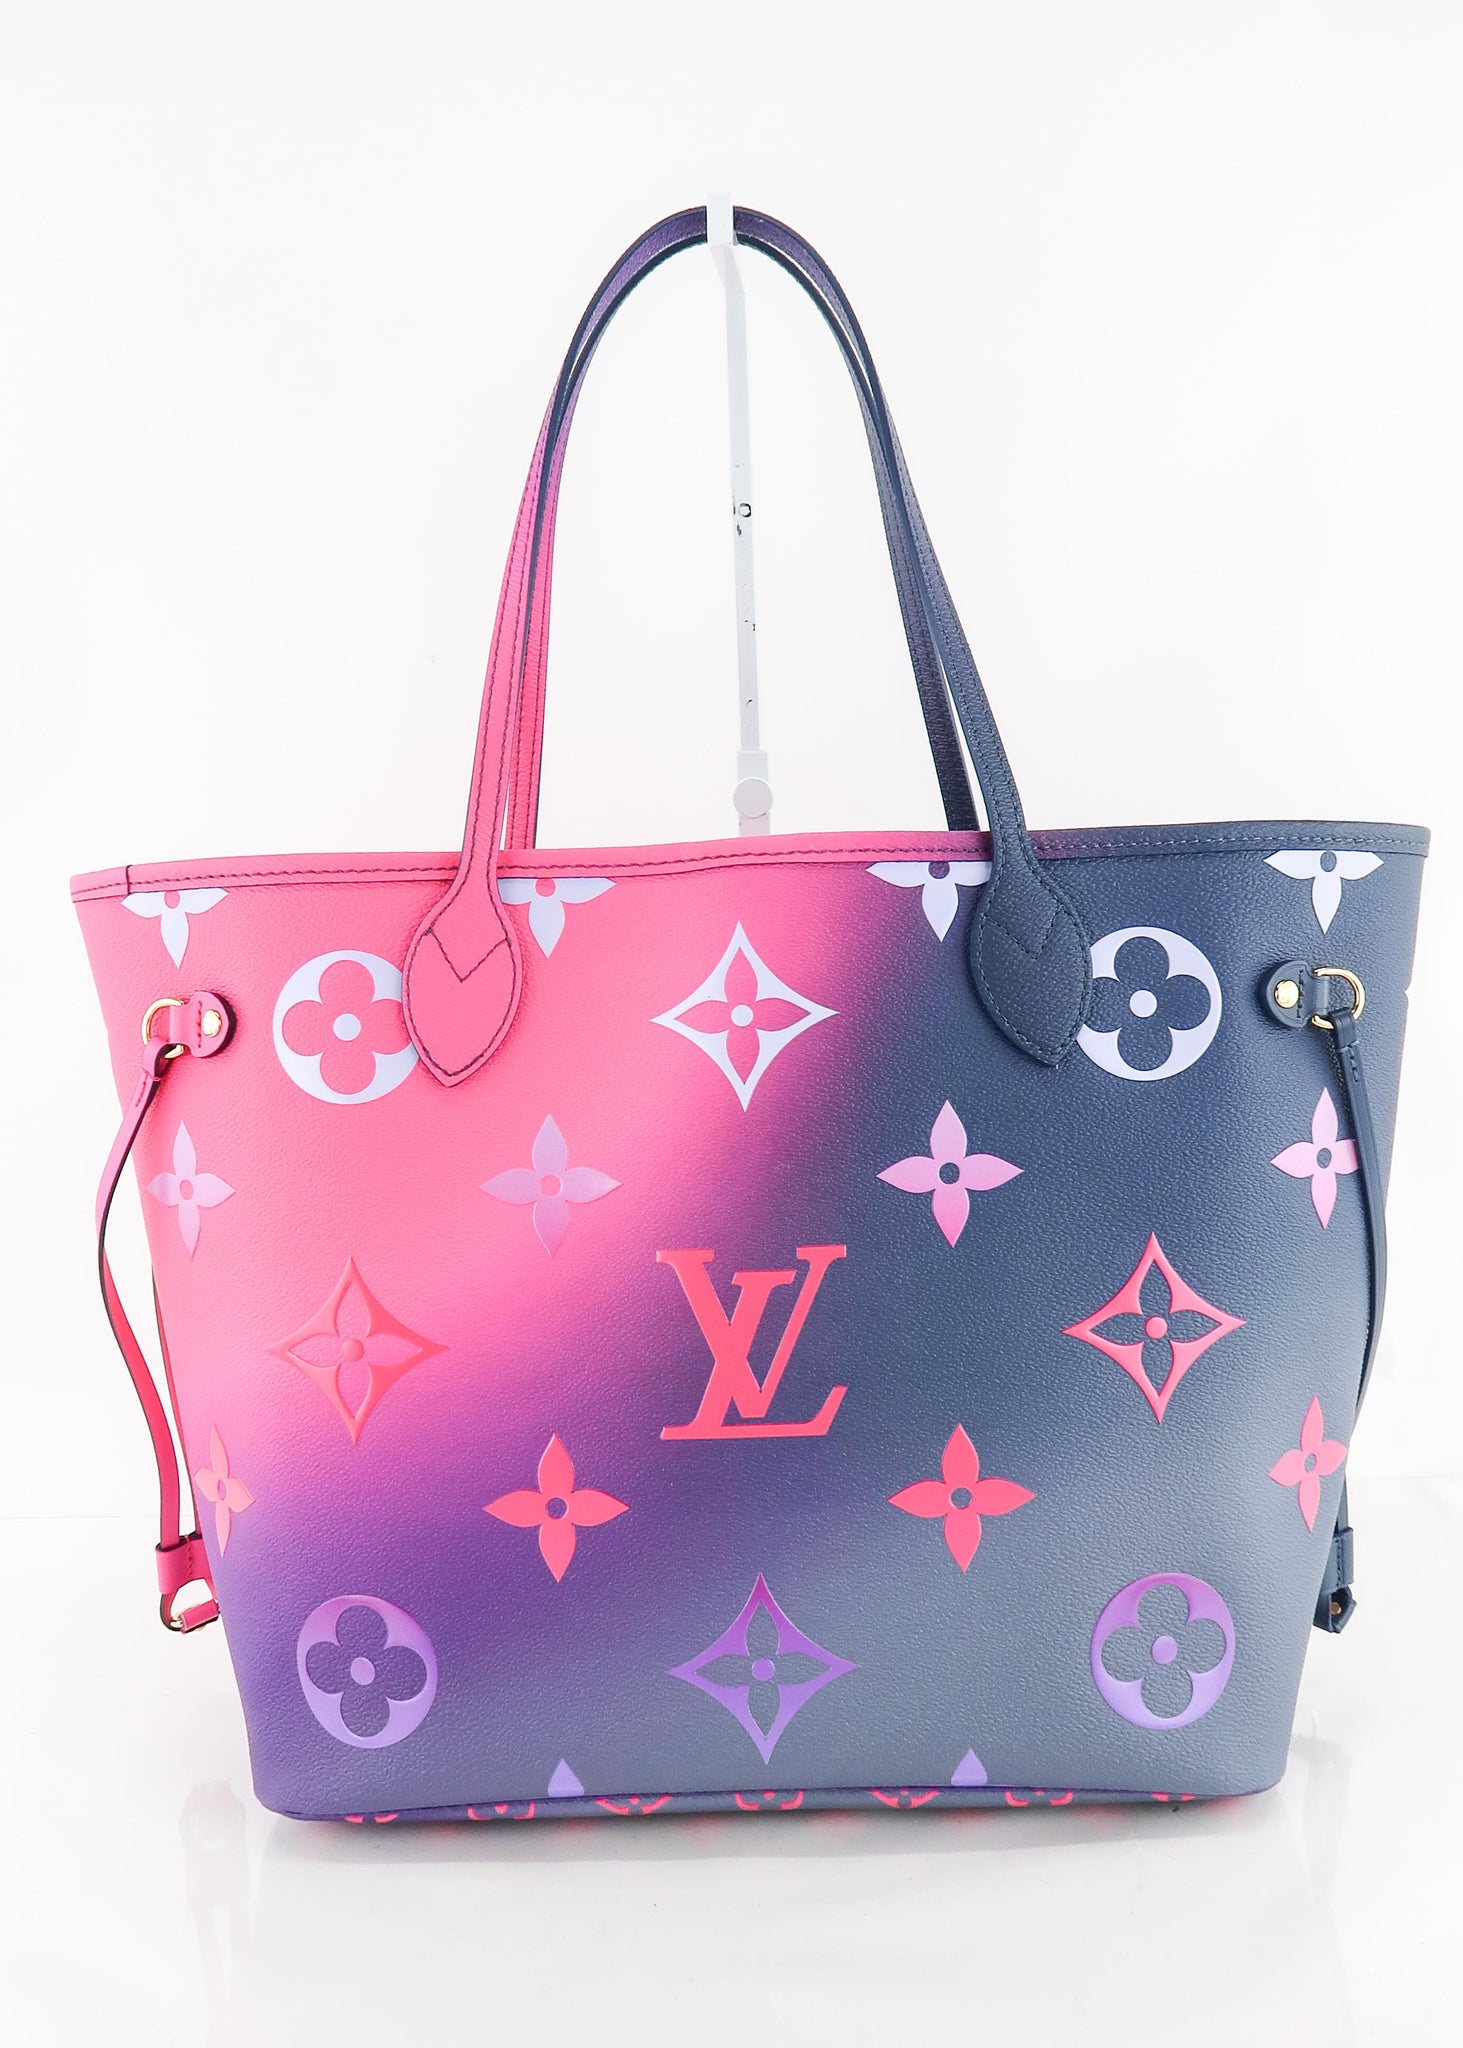 Louis Vuitton Neverfull MM with Pouch, Empreinte Leather Black and Hot  Pink, New in Dustbag